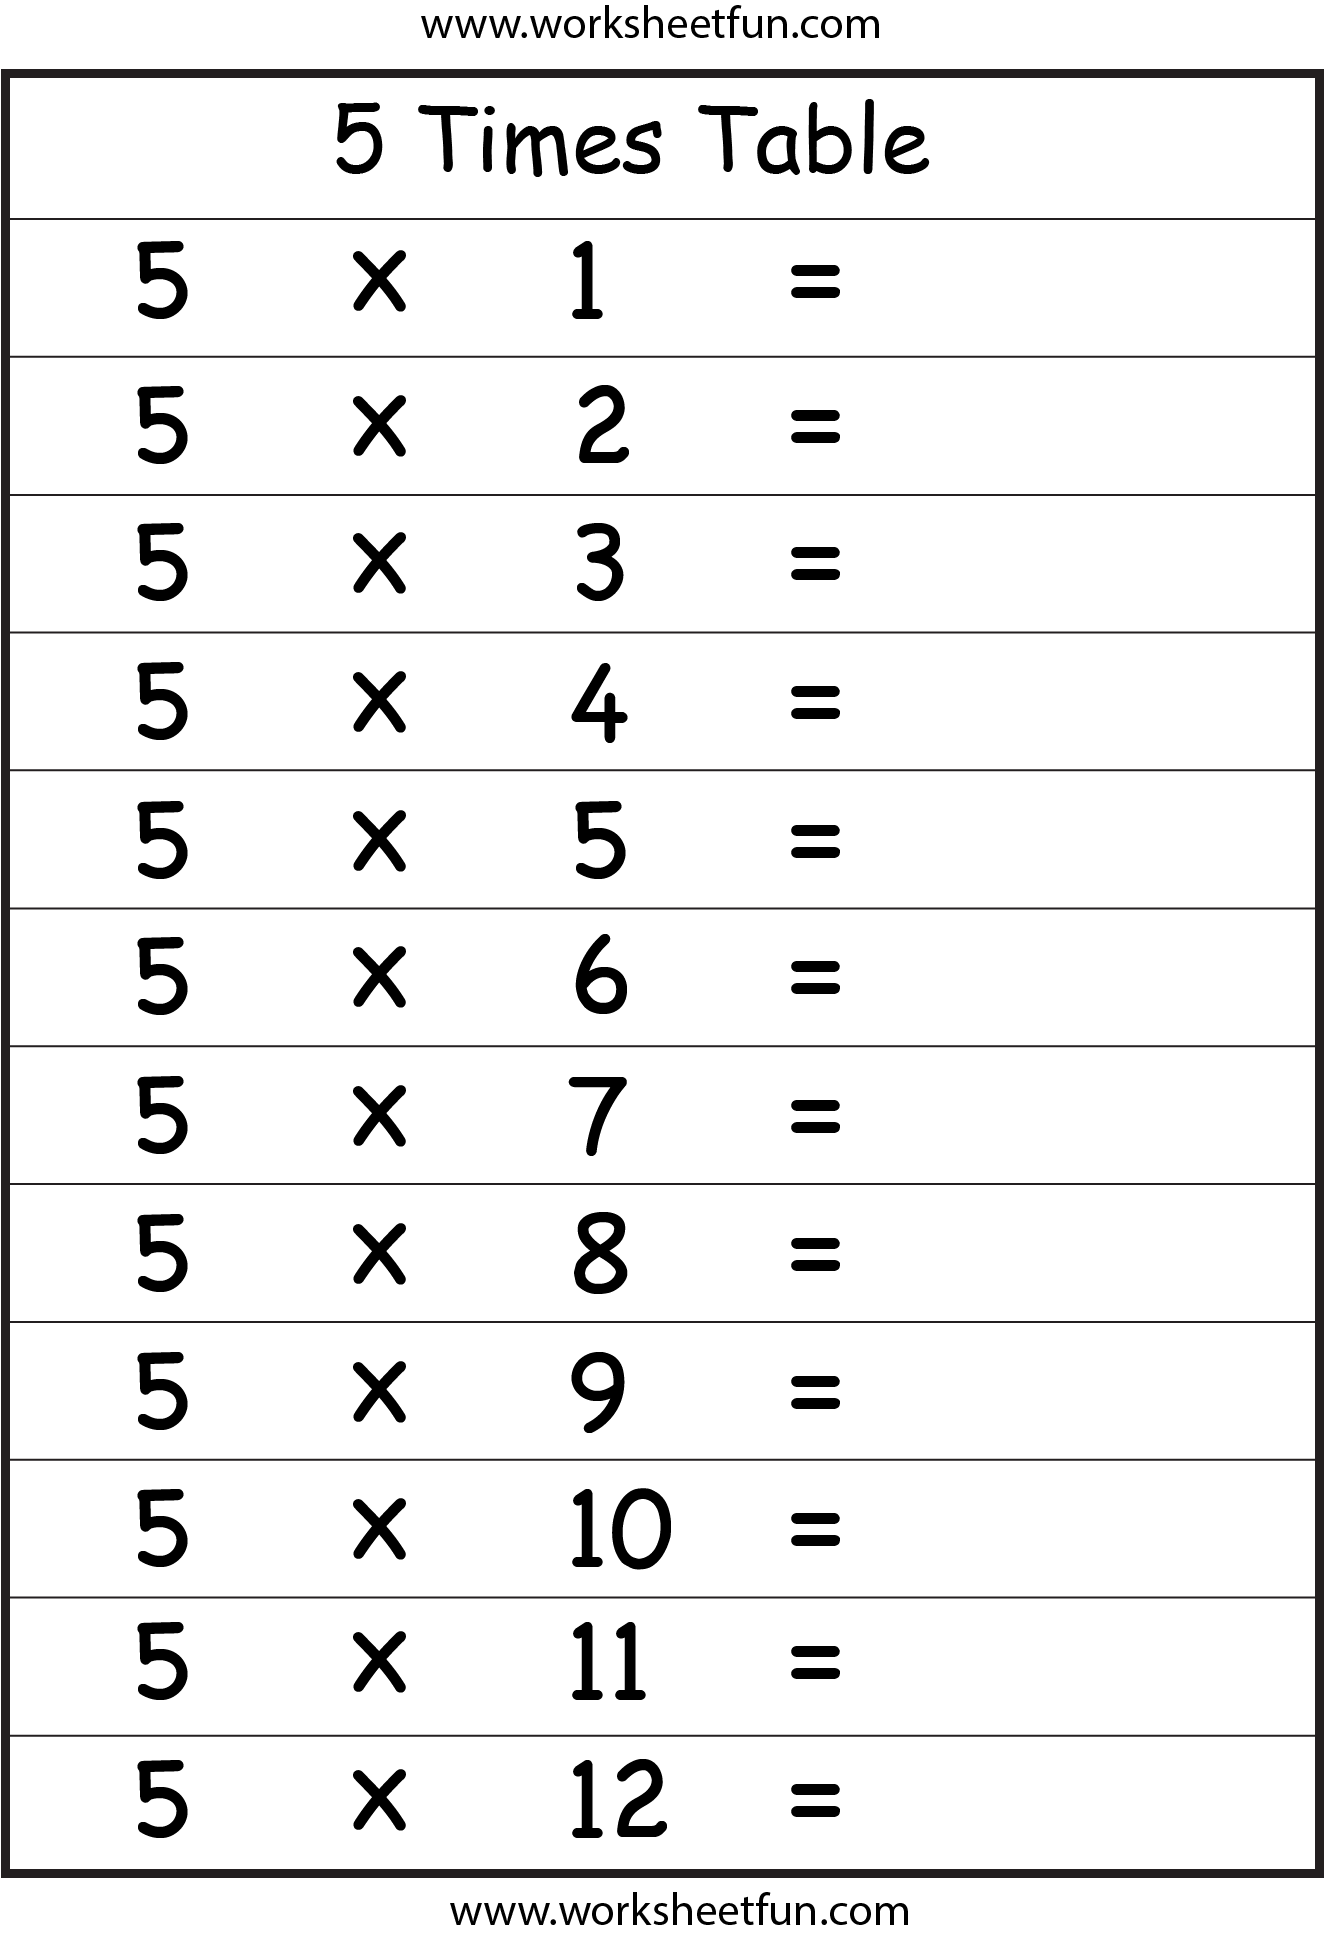 Multiplication Times Tables Worksheets 2 3 4 5 6 7 8 9 10 11 12 Times Tables Times Tables Worksheets Multiplication Times Tables Math Worksheets